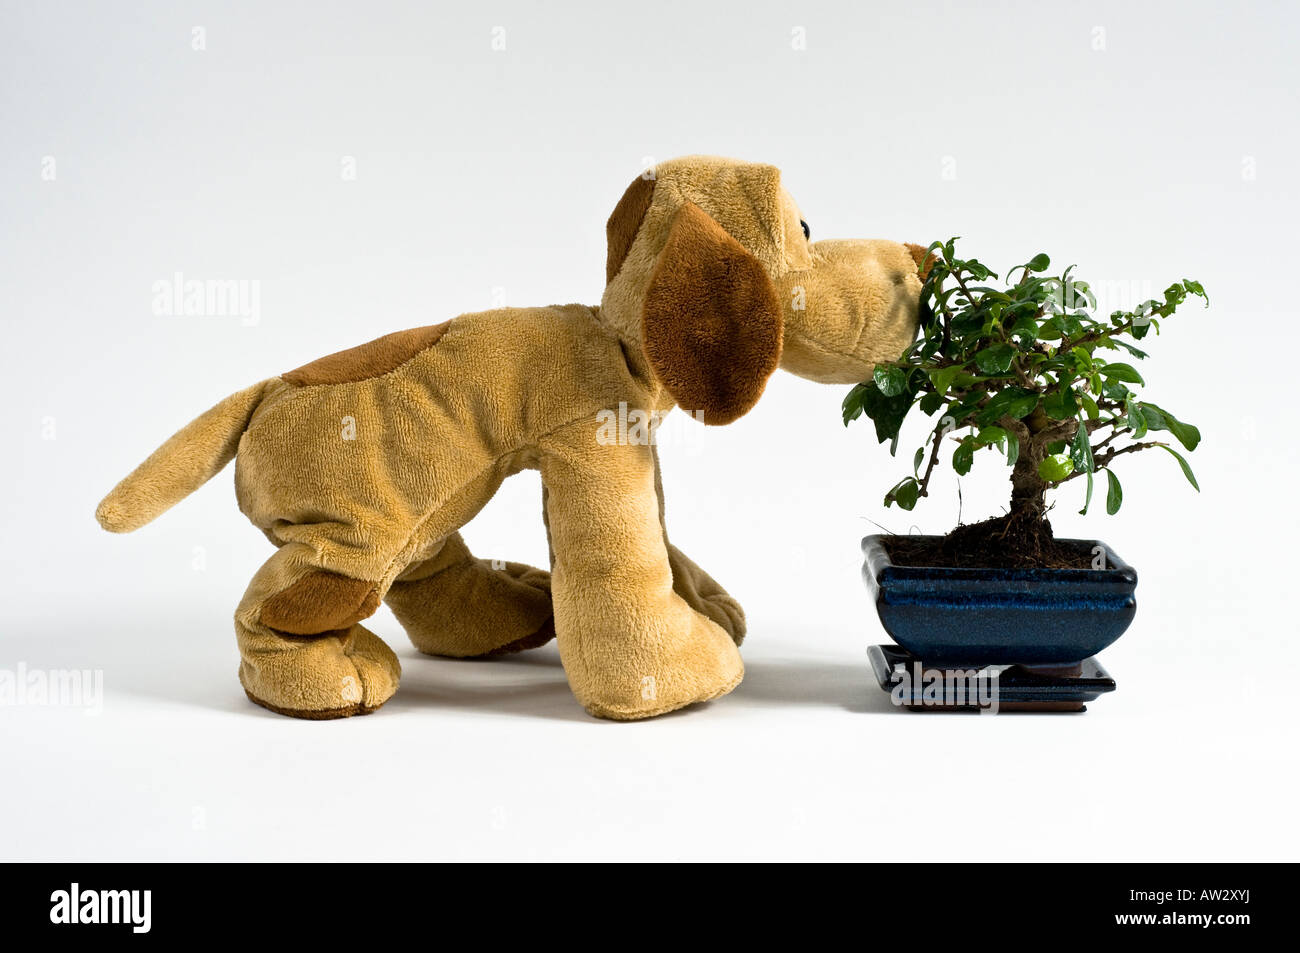 brown stuffed toy dog sniffing a small Bonzi tree in a blue pot with tray Stock Photo